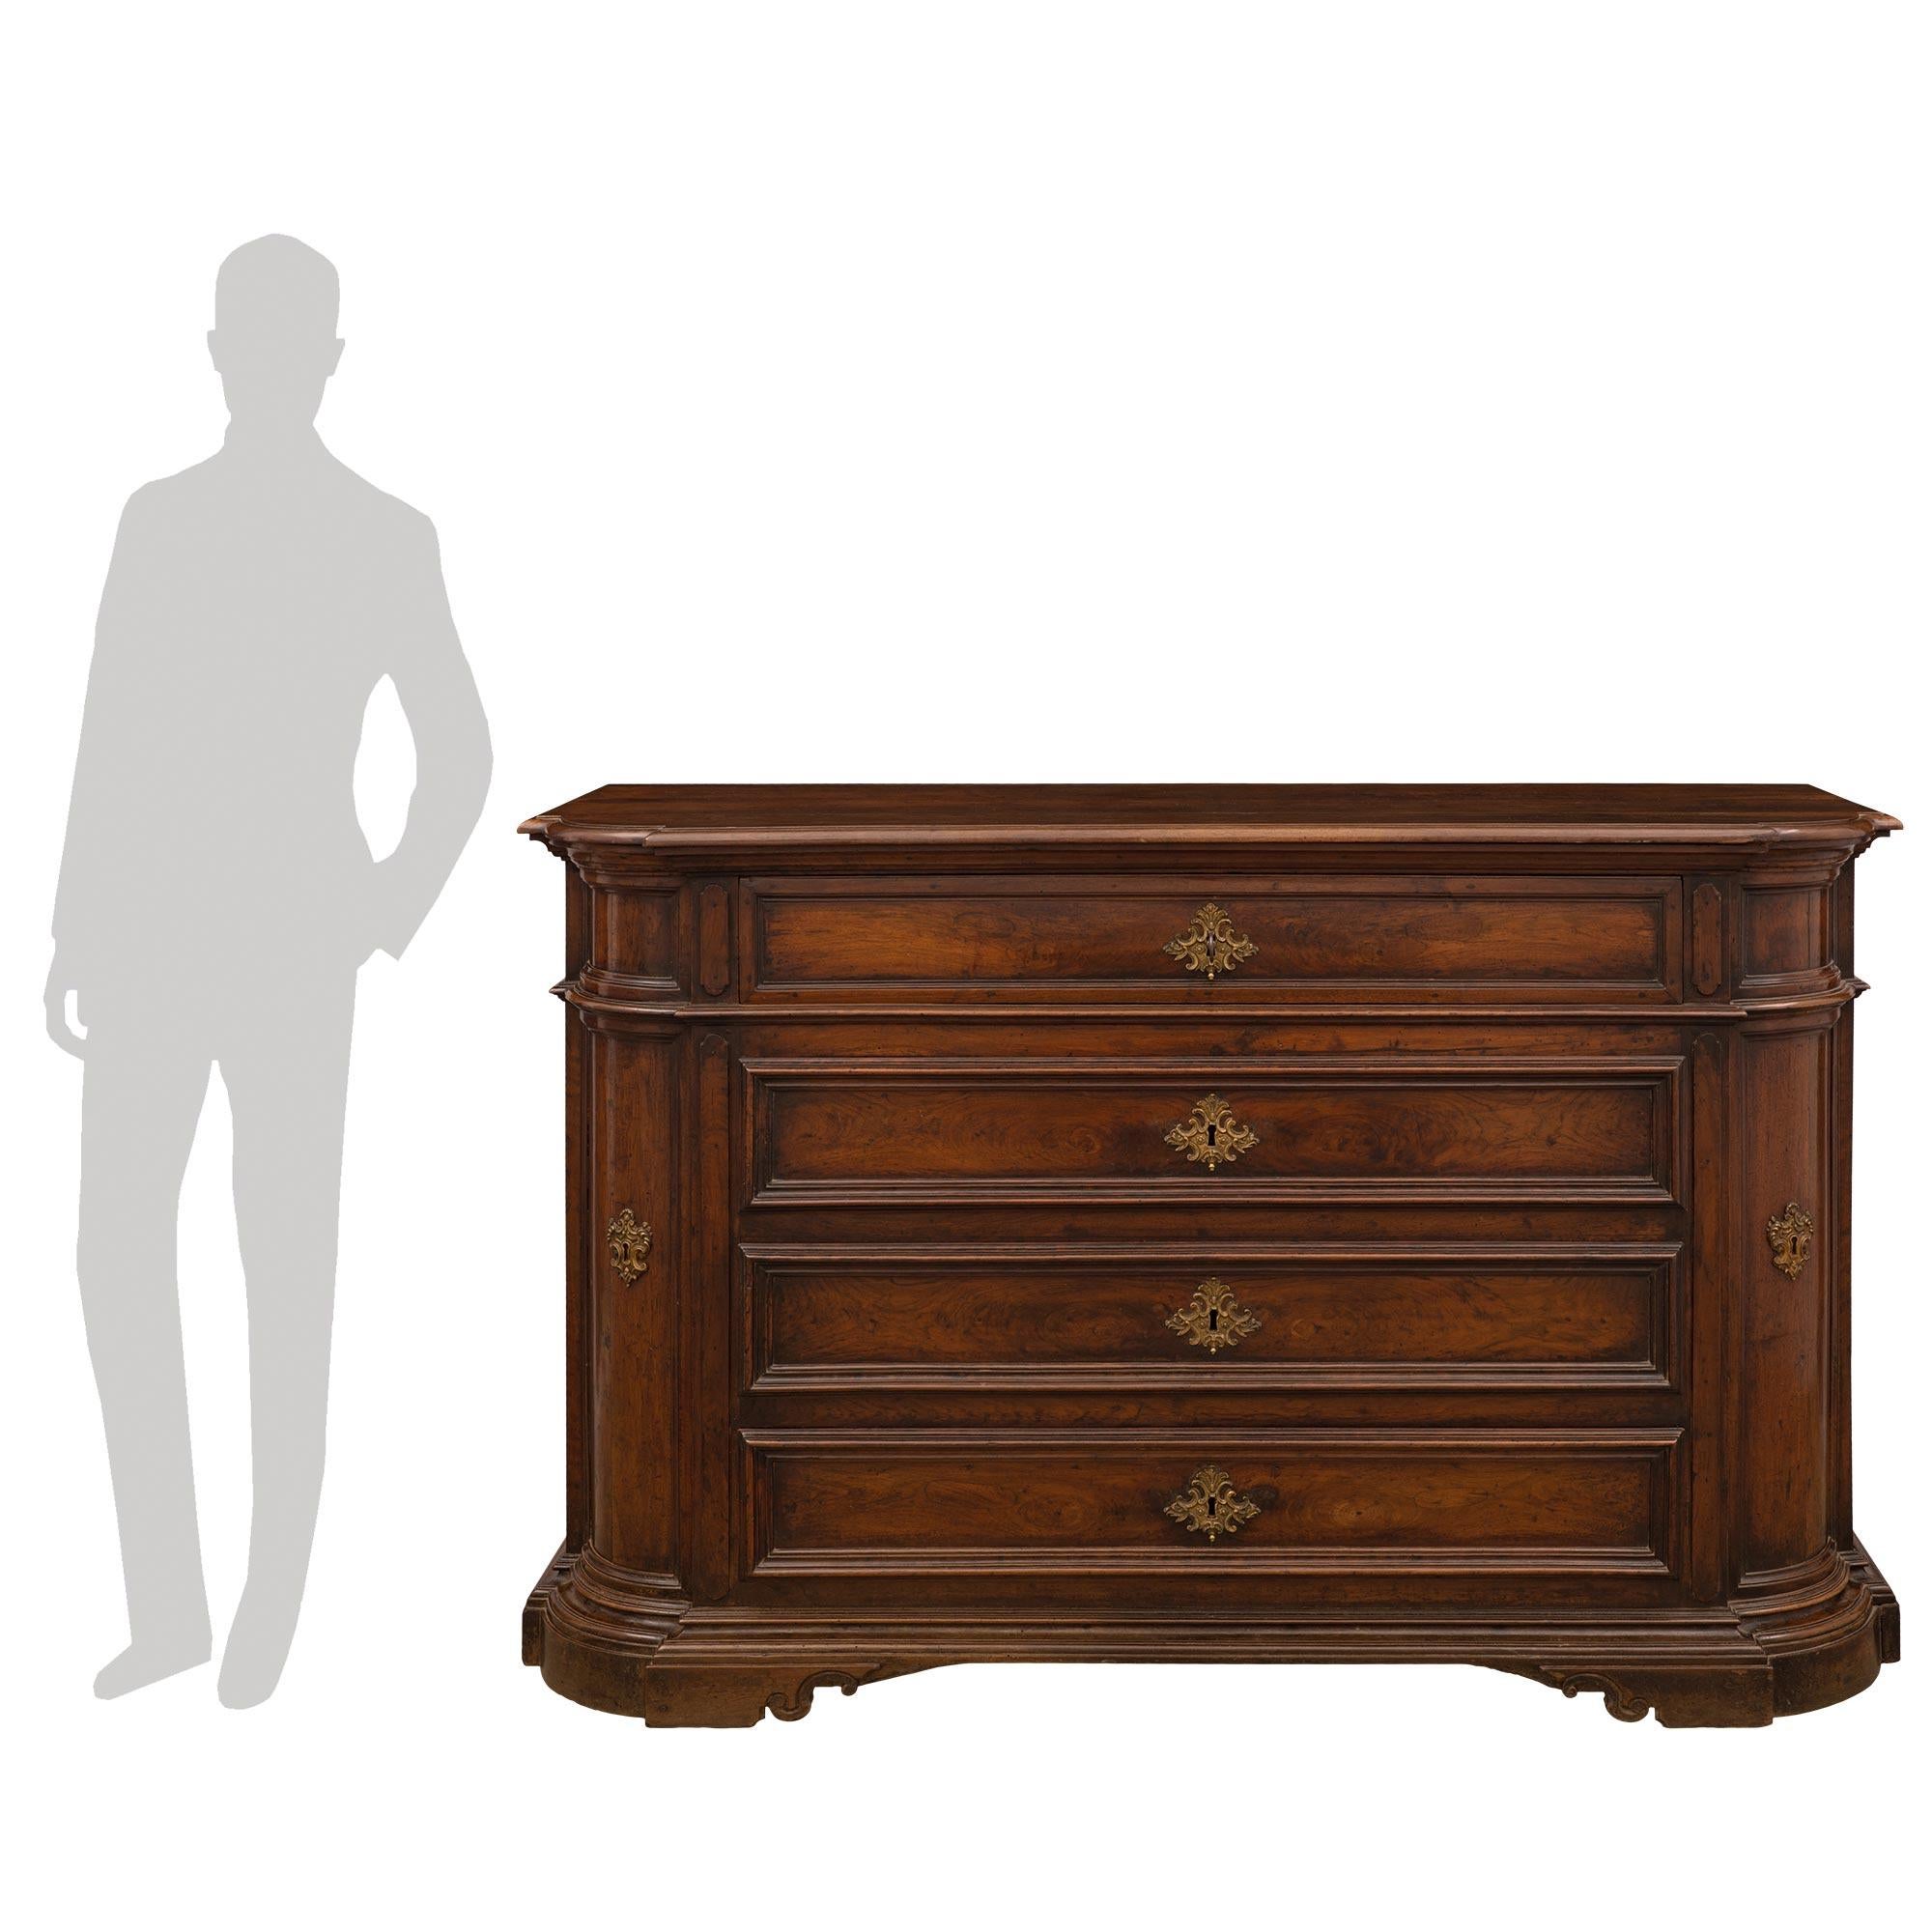 A handsome and most impressive Italian mid-18th-century walnut commode from Naples, circa 1740. The chest is raised by elegant lightly scrolled supports below an elegant mottled stepped wrap-around band at the base. At the center are four drawers,